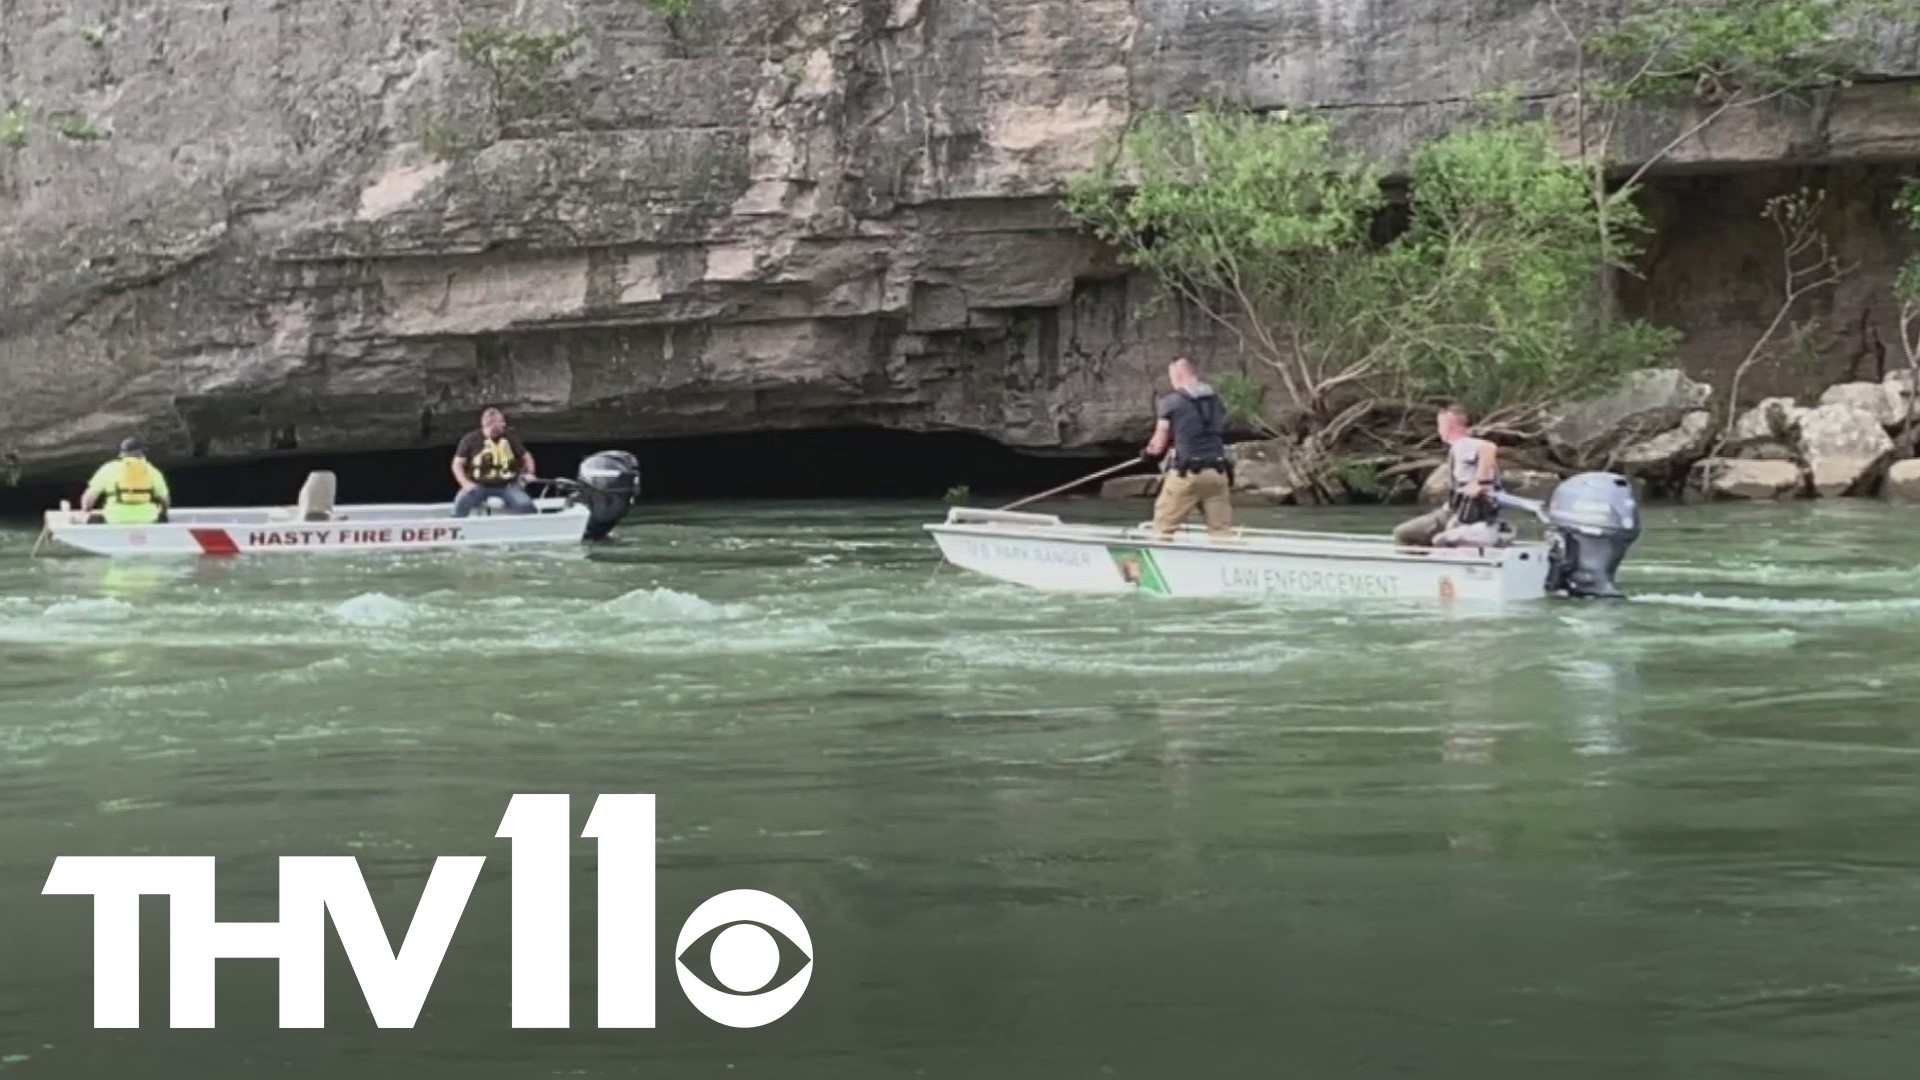 The National Park Service announced on Thursday that they found the body of the 39-year-old man who was swept underwater in the Buffalo National River.